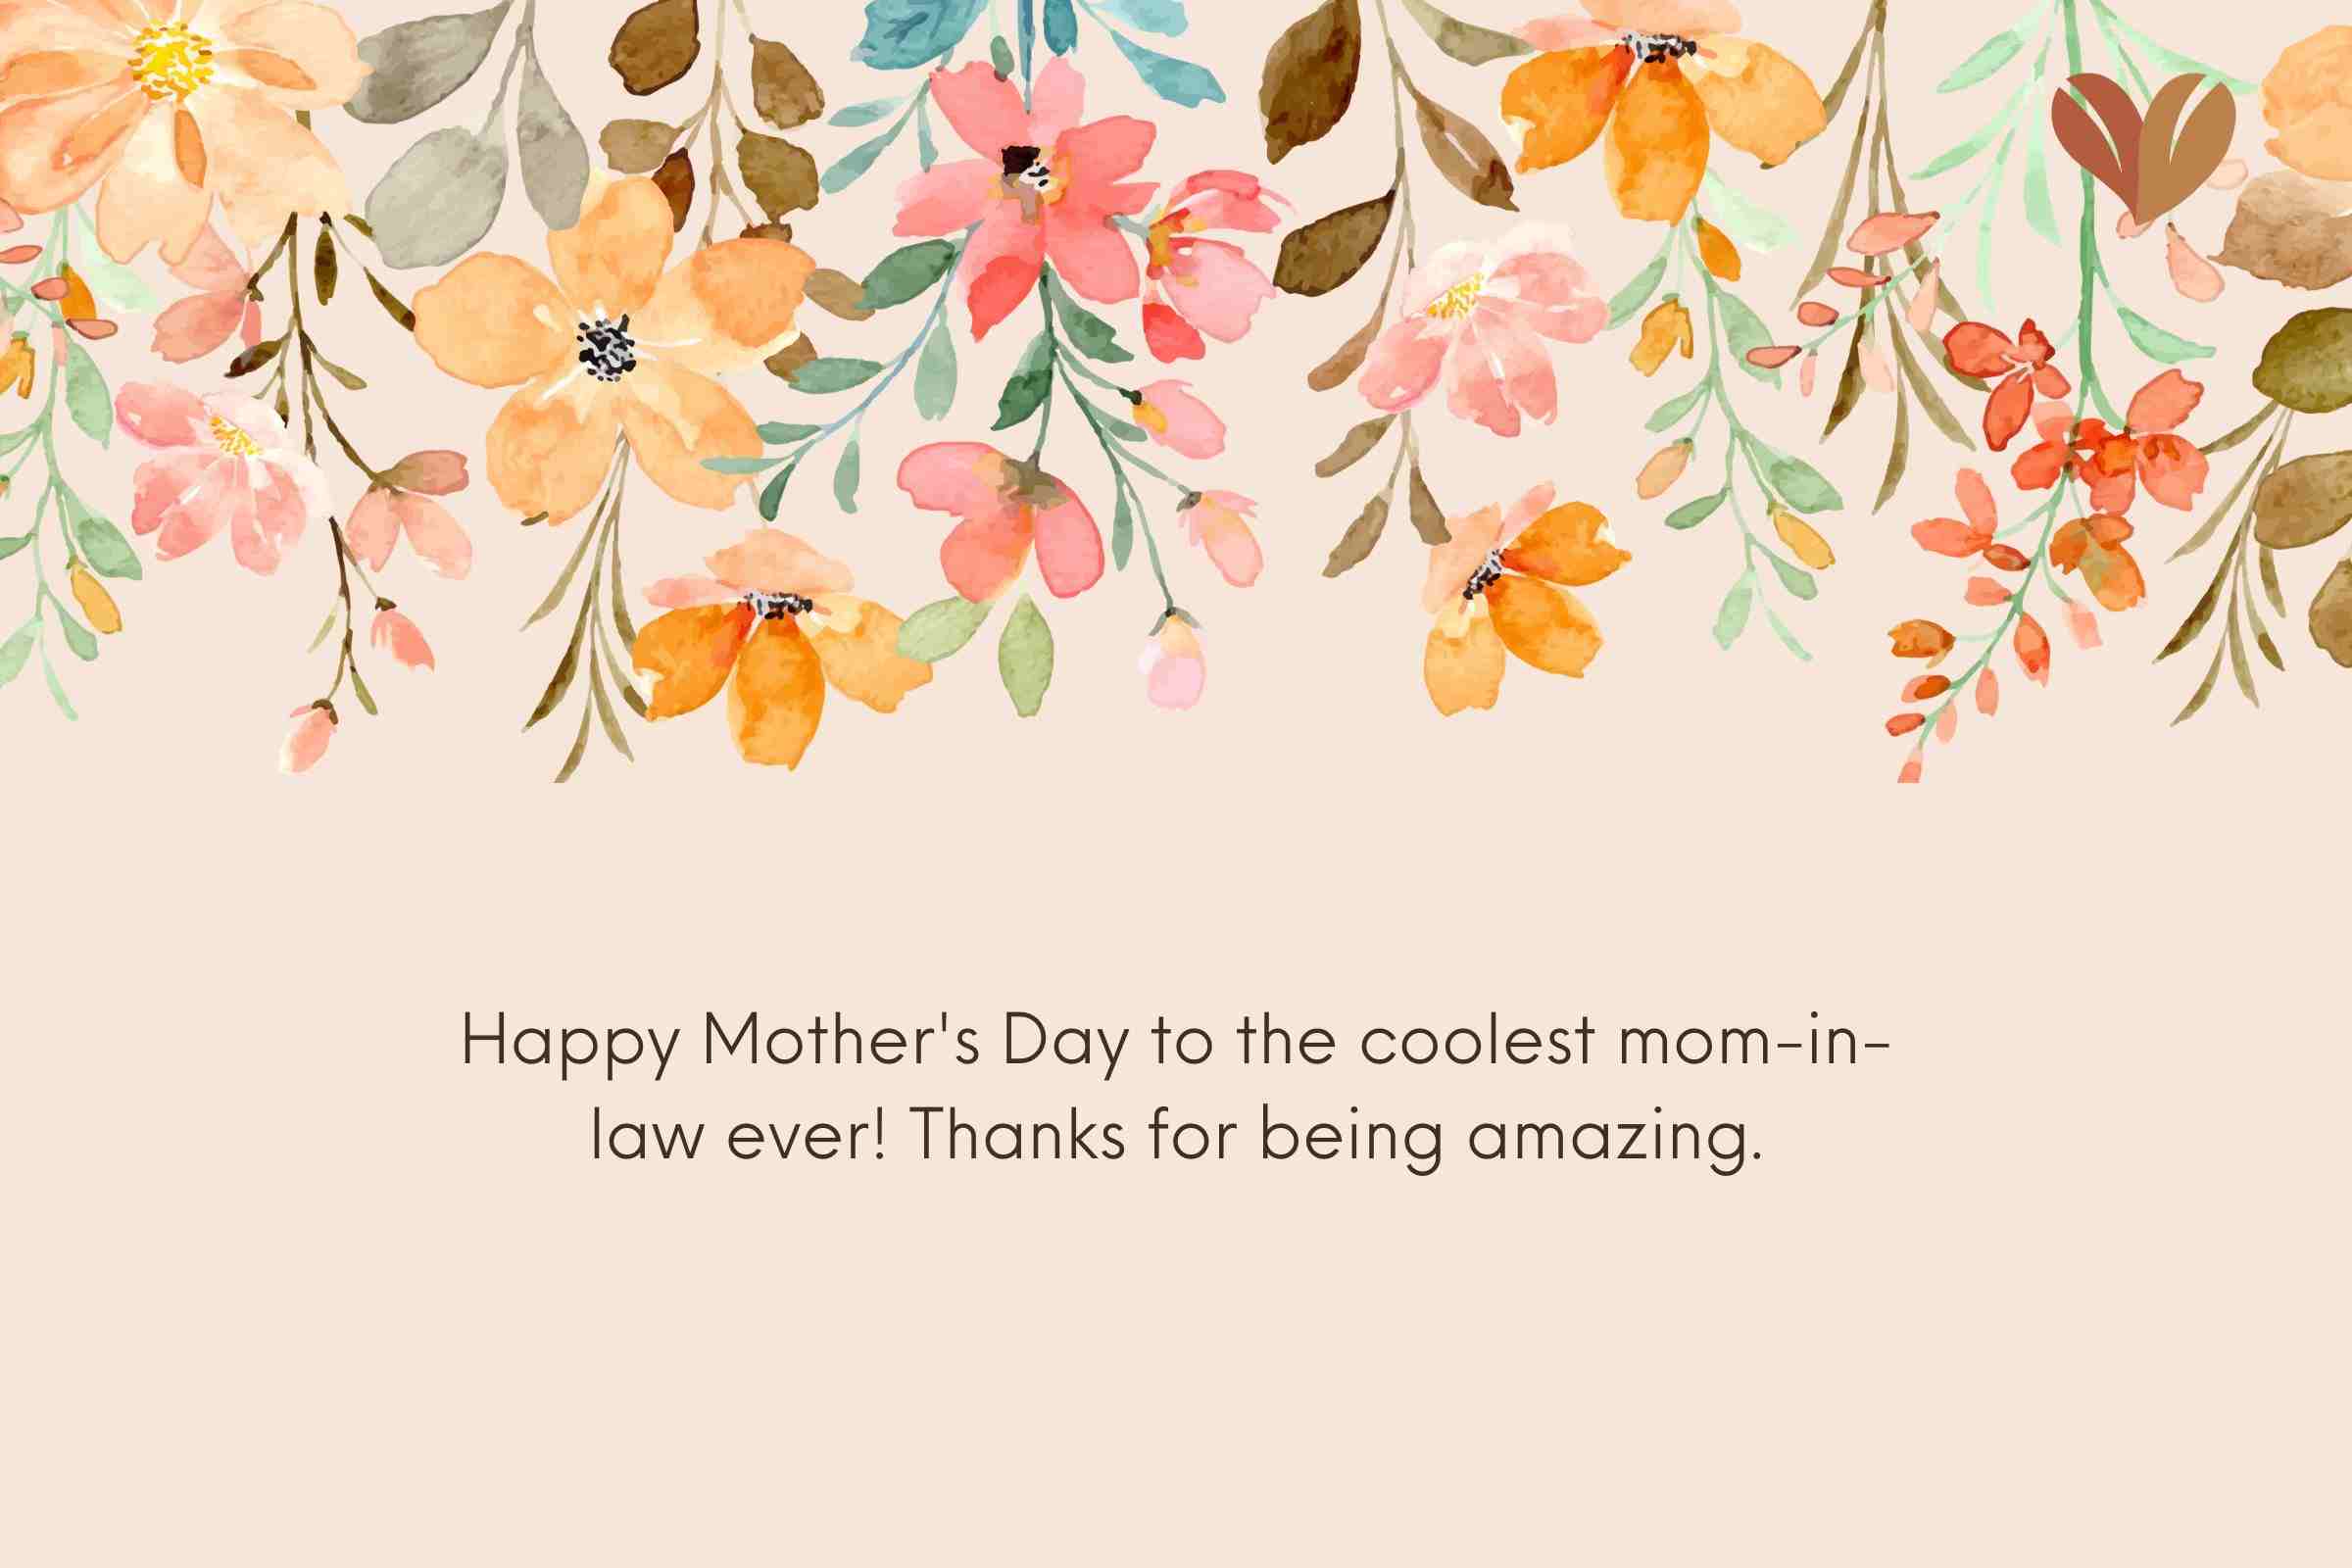 Heartfelt Mother's Day messages for your mother-in-law